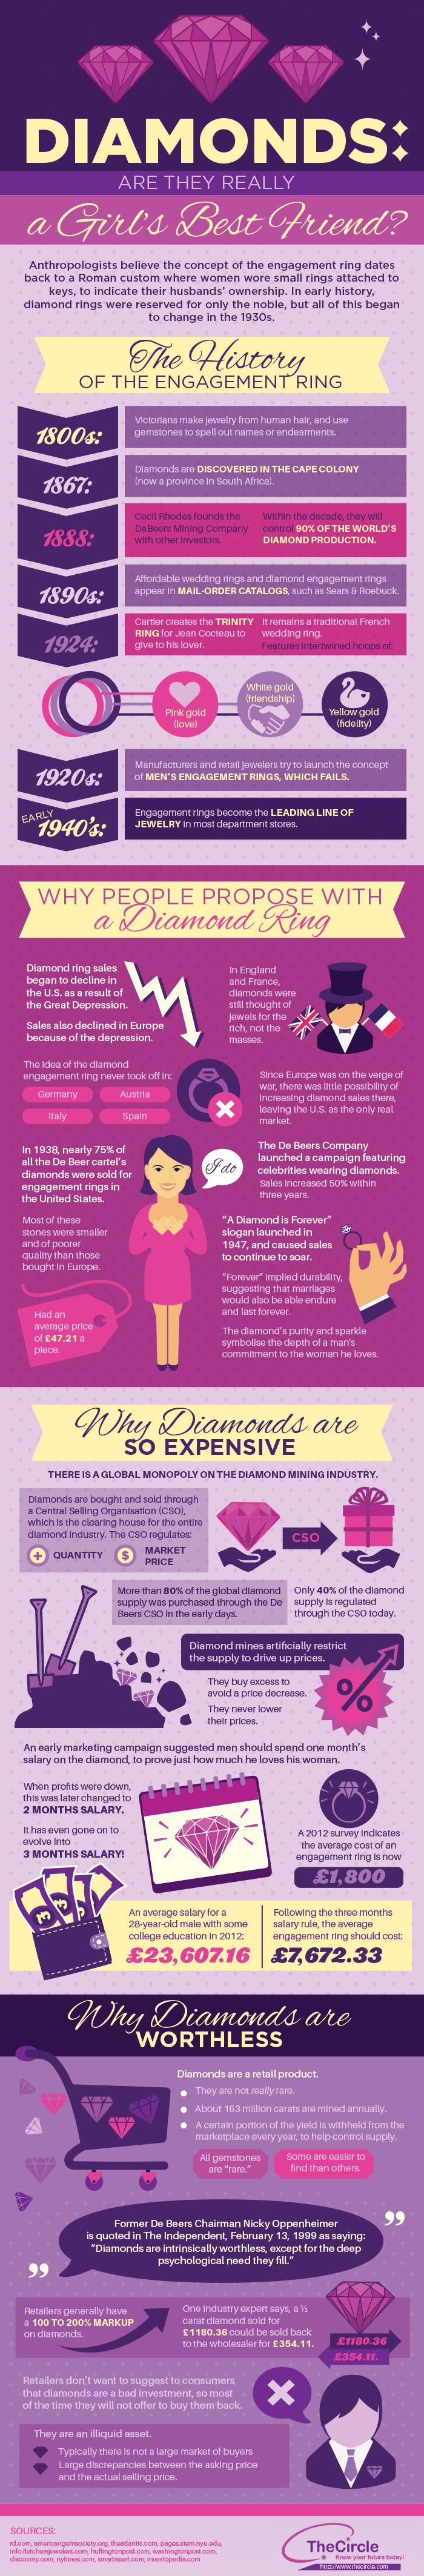 Are Diamonds Really A Girl's Best Friend? - The Fashionable Gal